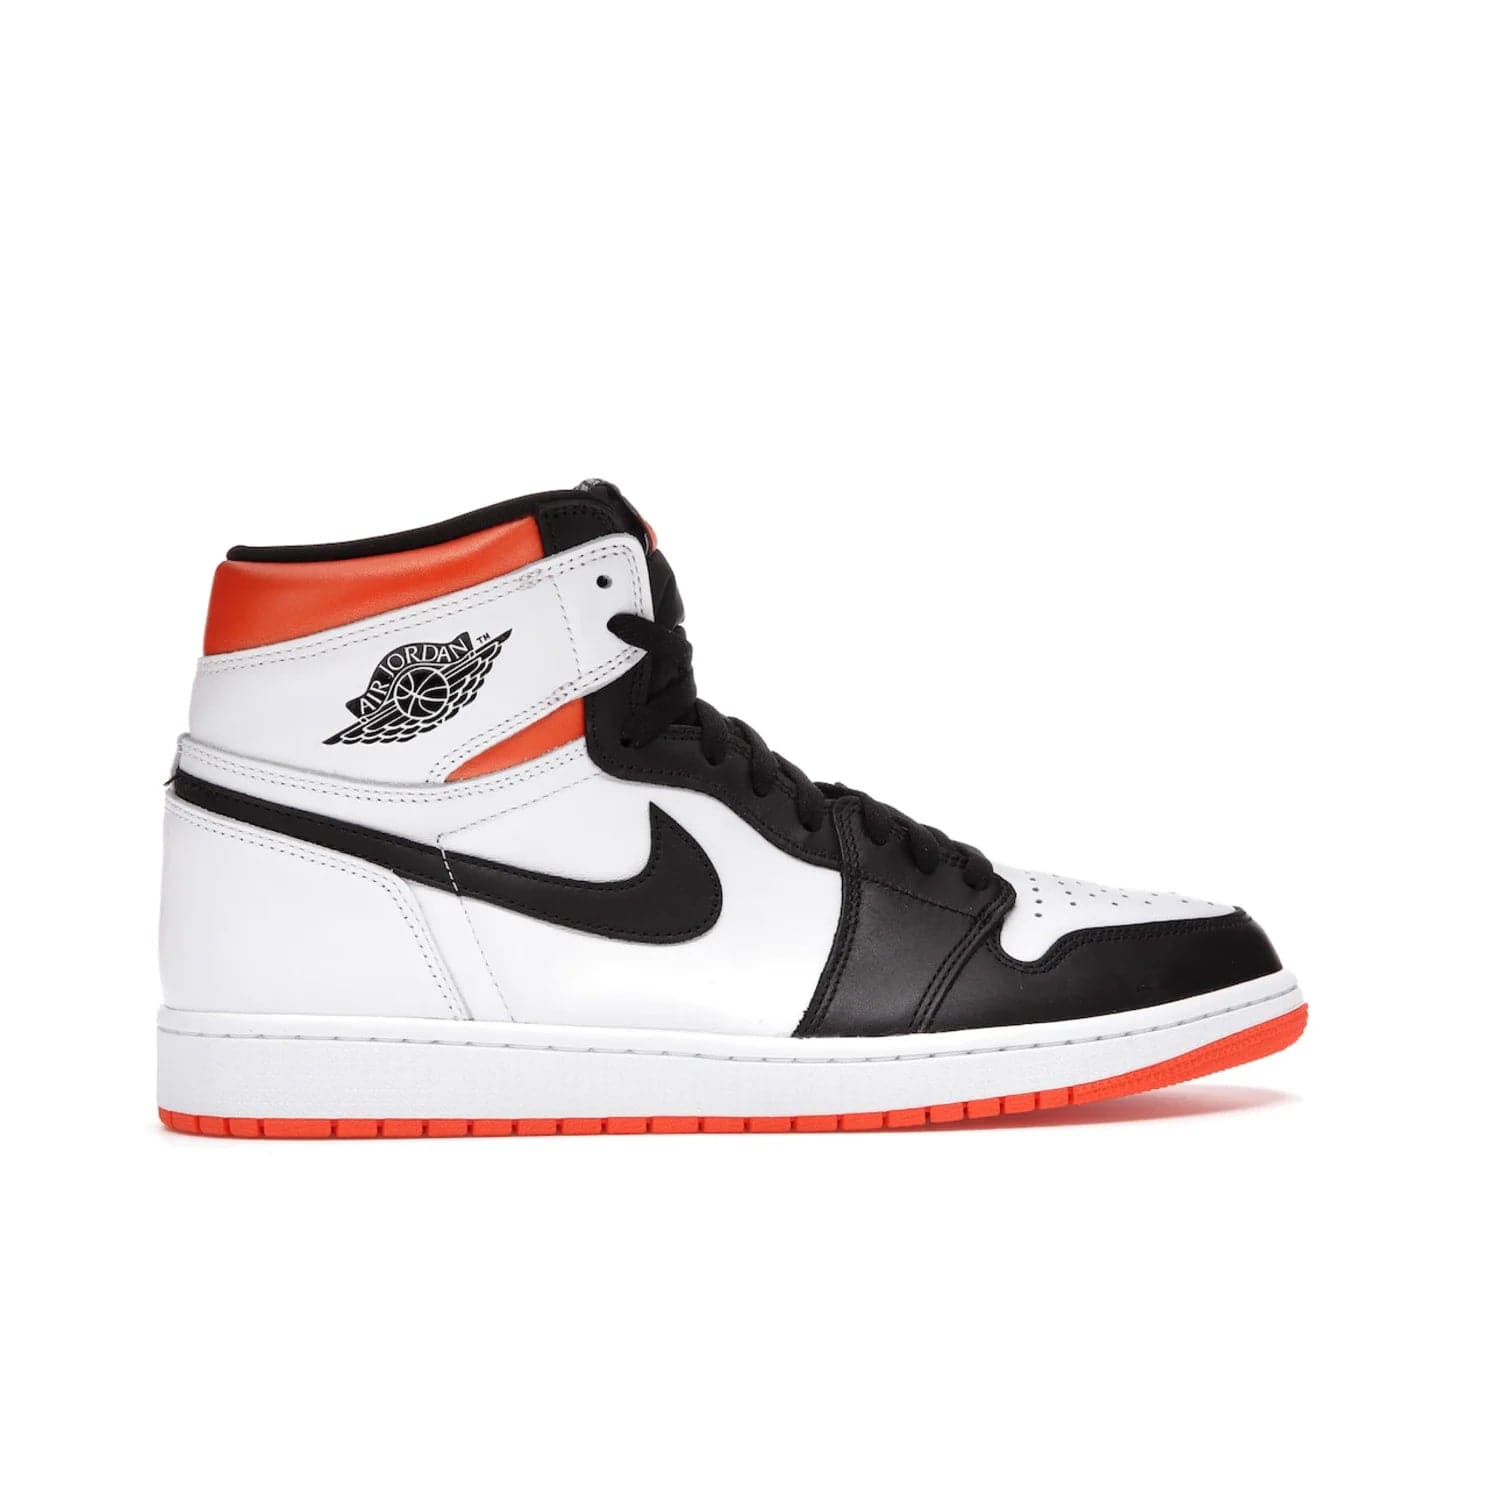 Jordan 1 Retro High Electro Orange - Image 36 - Only at www.BallersClubKickz.com - This Air Jordan 1 Retro High Electro Orange features a white leather upper with black overlays and vibrant Hyper Orange ankle wrap. Turn heads with this iconic design of woven tongue label and sole. Get yours today and add some serious style to your rotation.